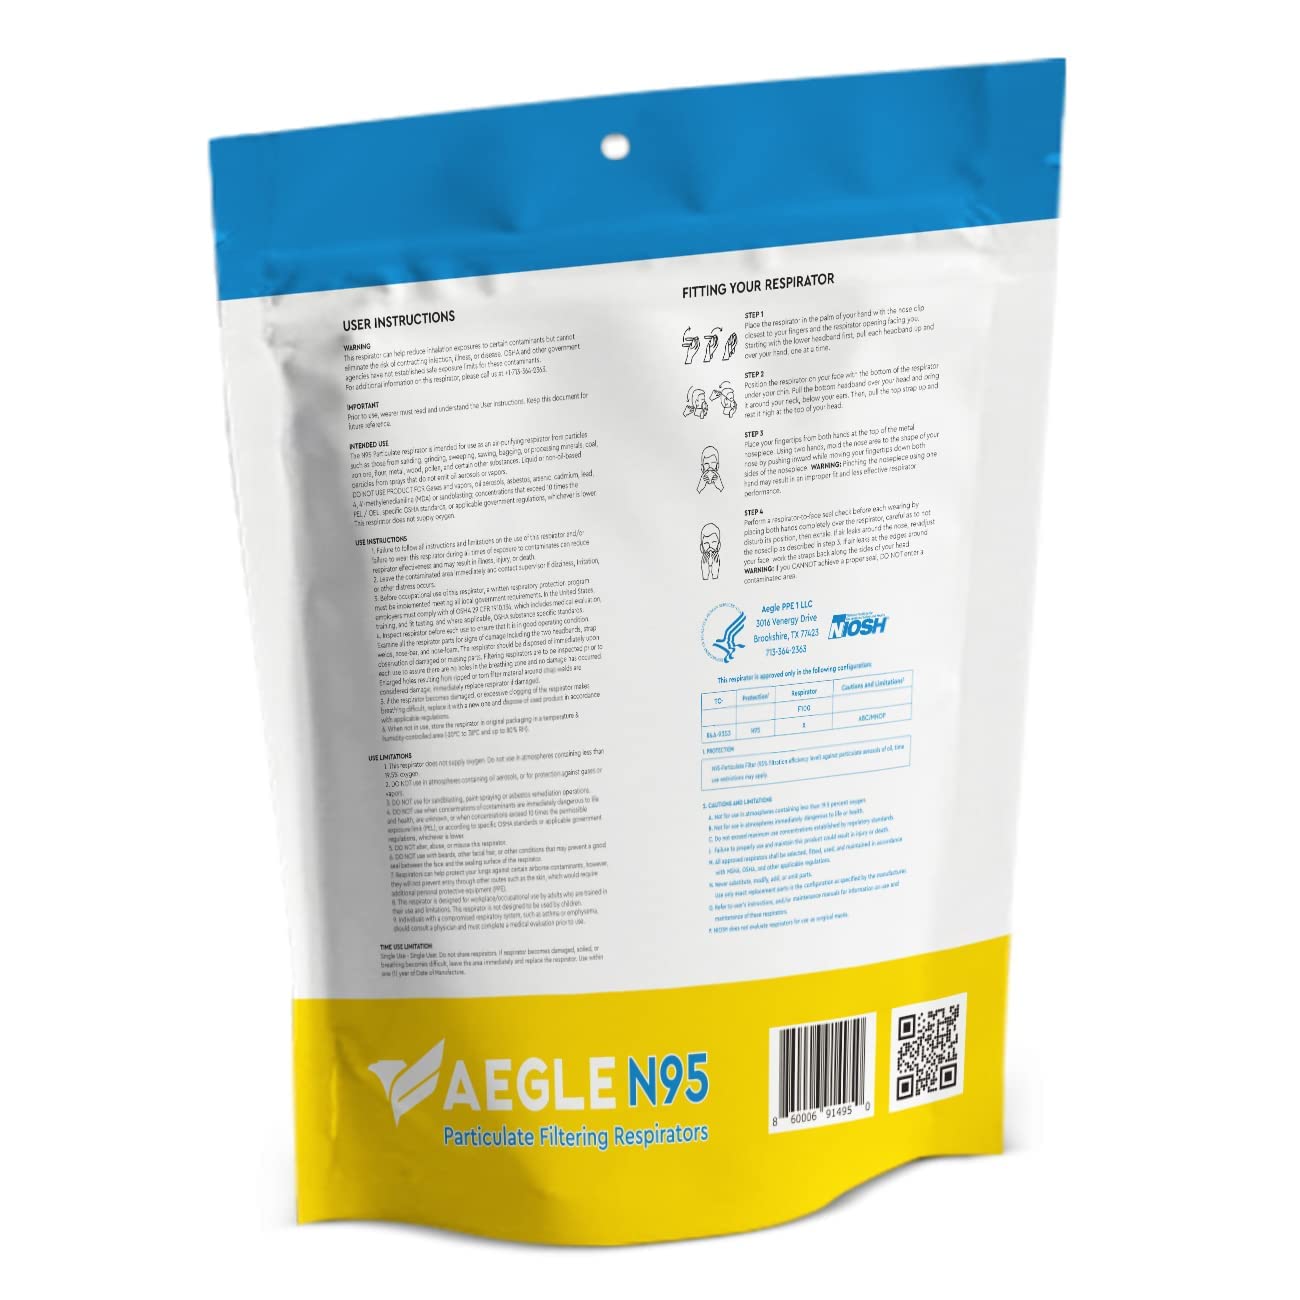 Aegle N95 Mask USA, NIOSH-approved, 50 Pack in anti-counterfeit packaging, Particulate Respirator, STS-F100